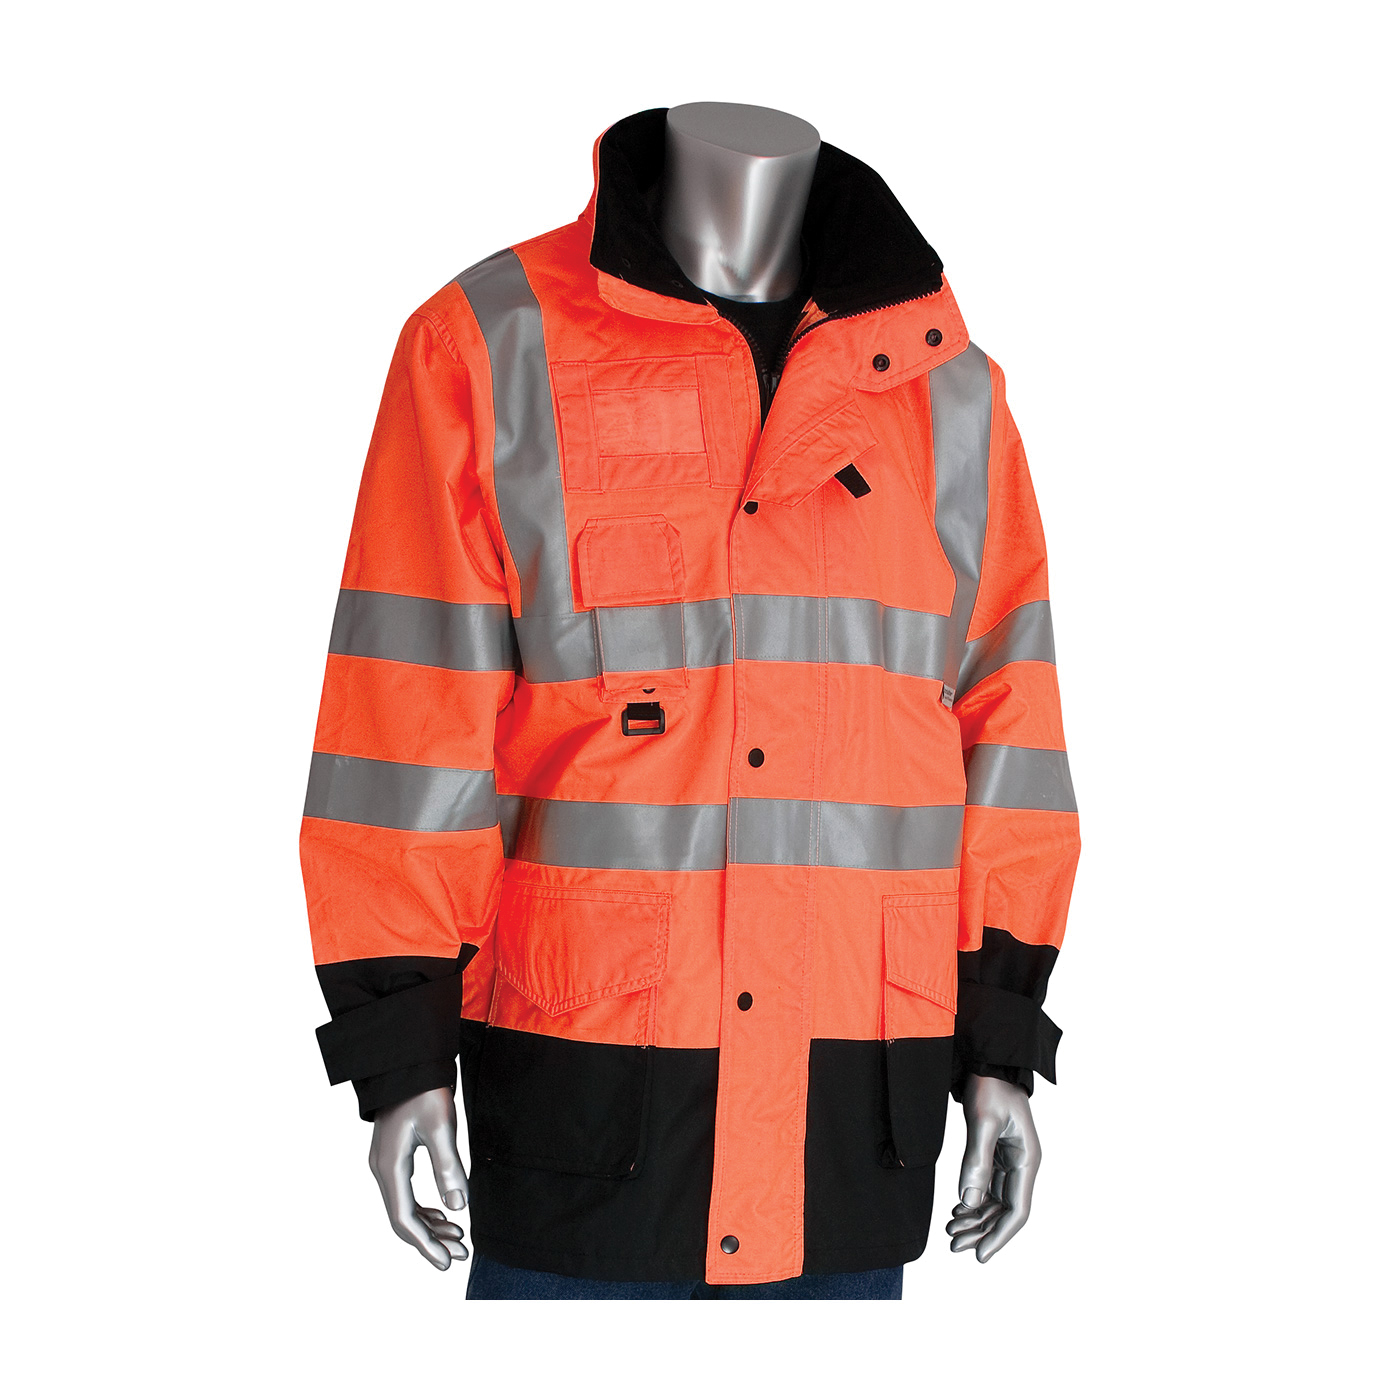 PIP® 343-1756-OR/S 7-in-1 All Condition Winter Coat With Inner Jacket and Vest Combination, Hi-Viz Orange, Polyester, 48 in Chest, Resists: Water, Specifications Met: ANSI 107 Class 3 Type R